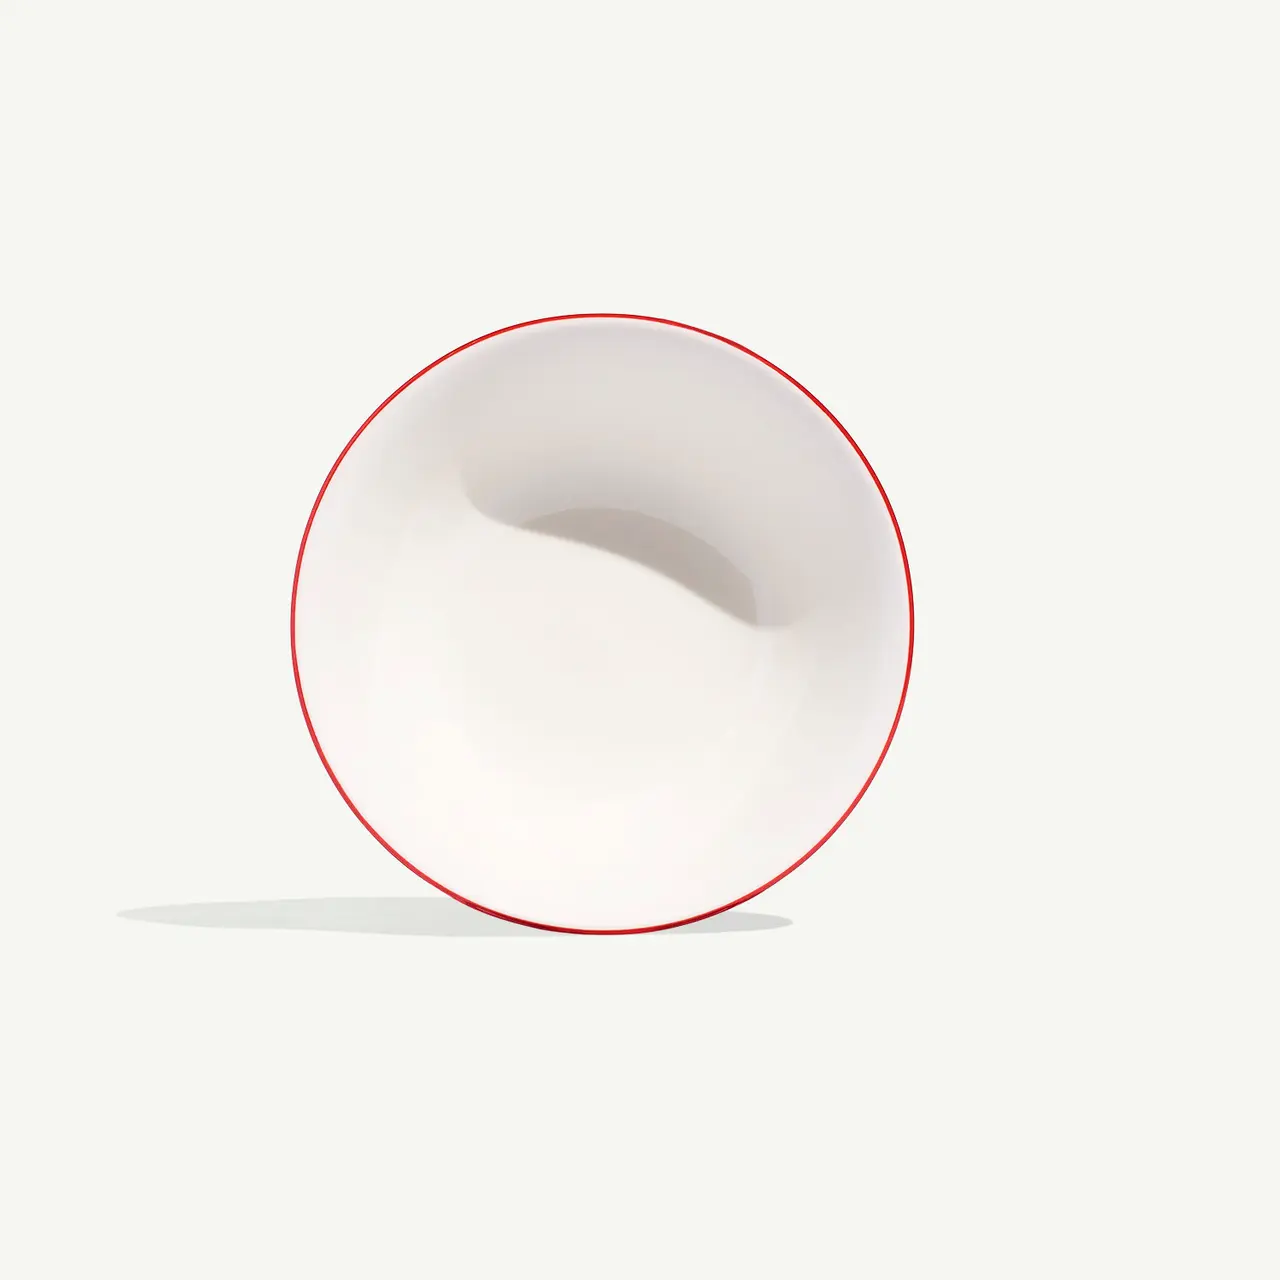 A white bowl with a red rim is tilted on a light background, casting a faint shadow.